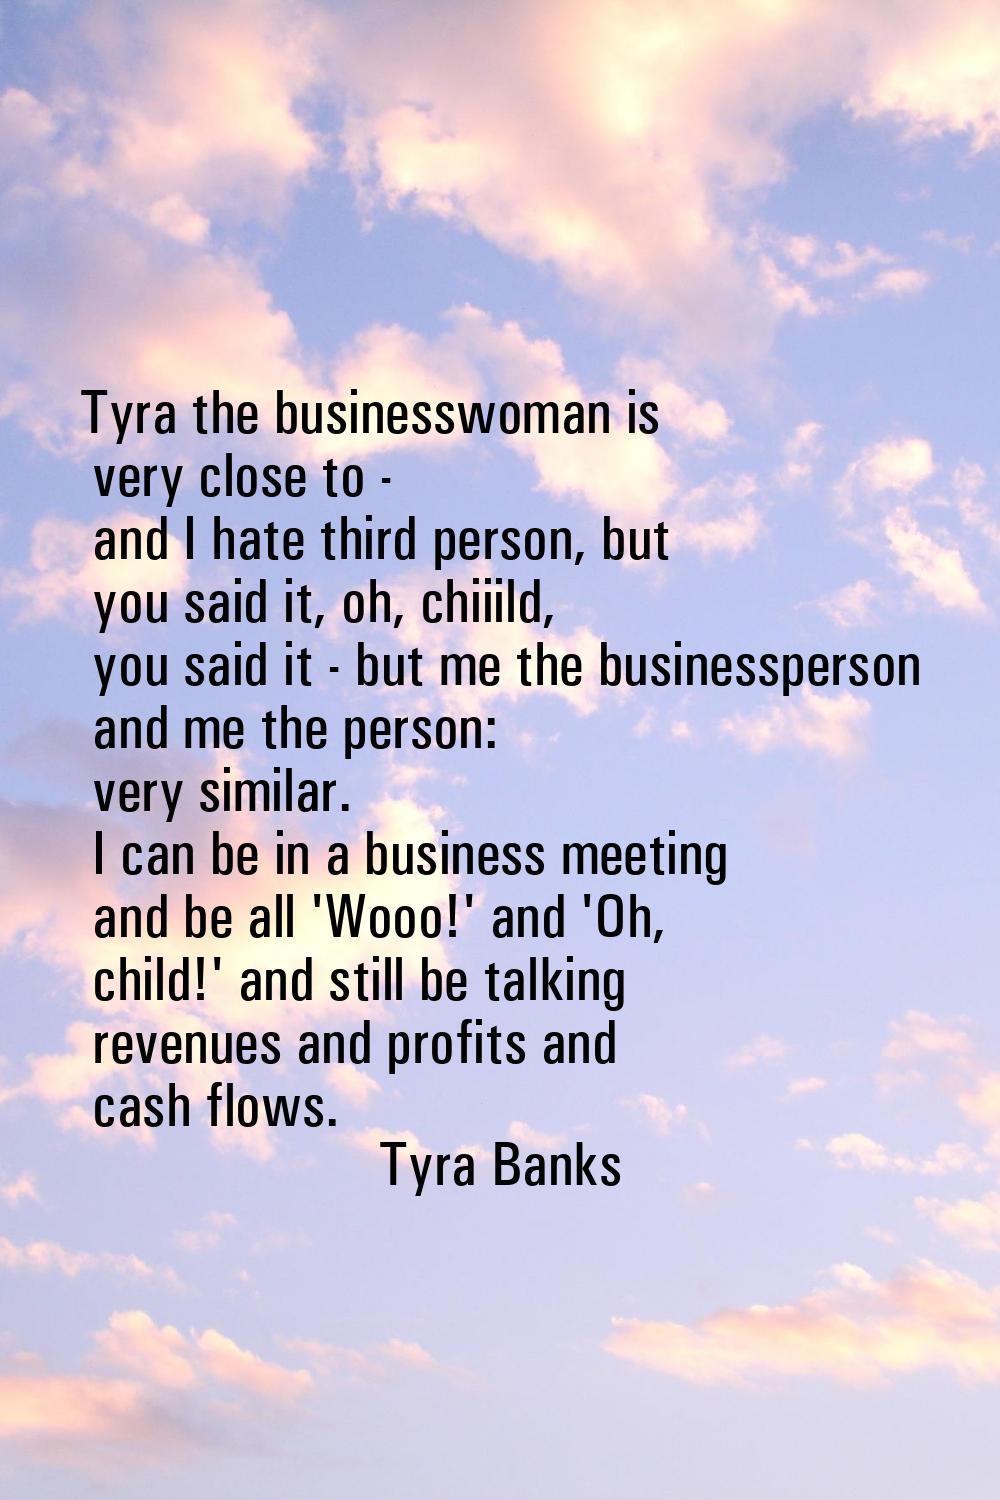 Tyra the businesswoman is very close to - and I hate third person, but you said it, oh, chiiild, yo